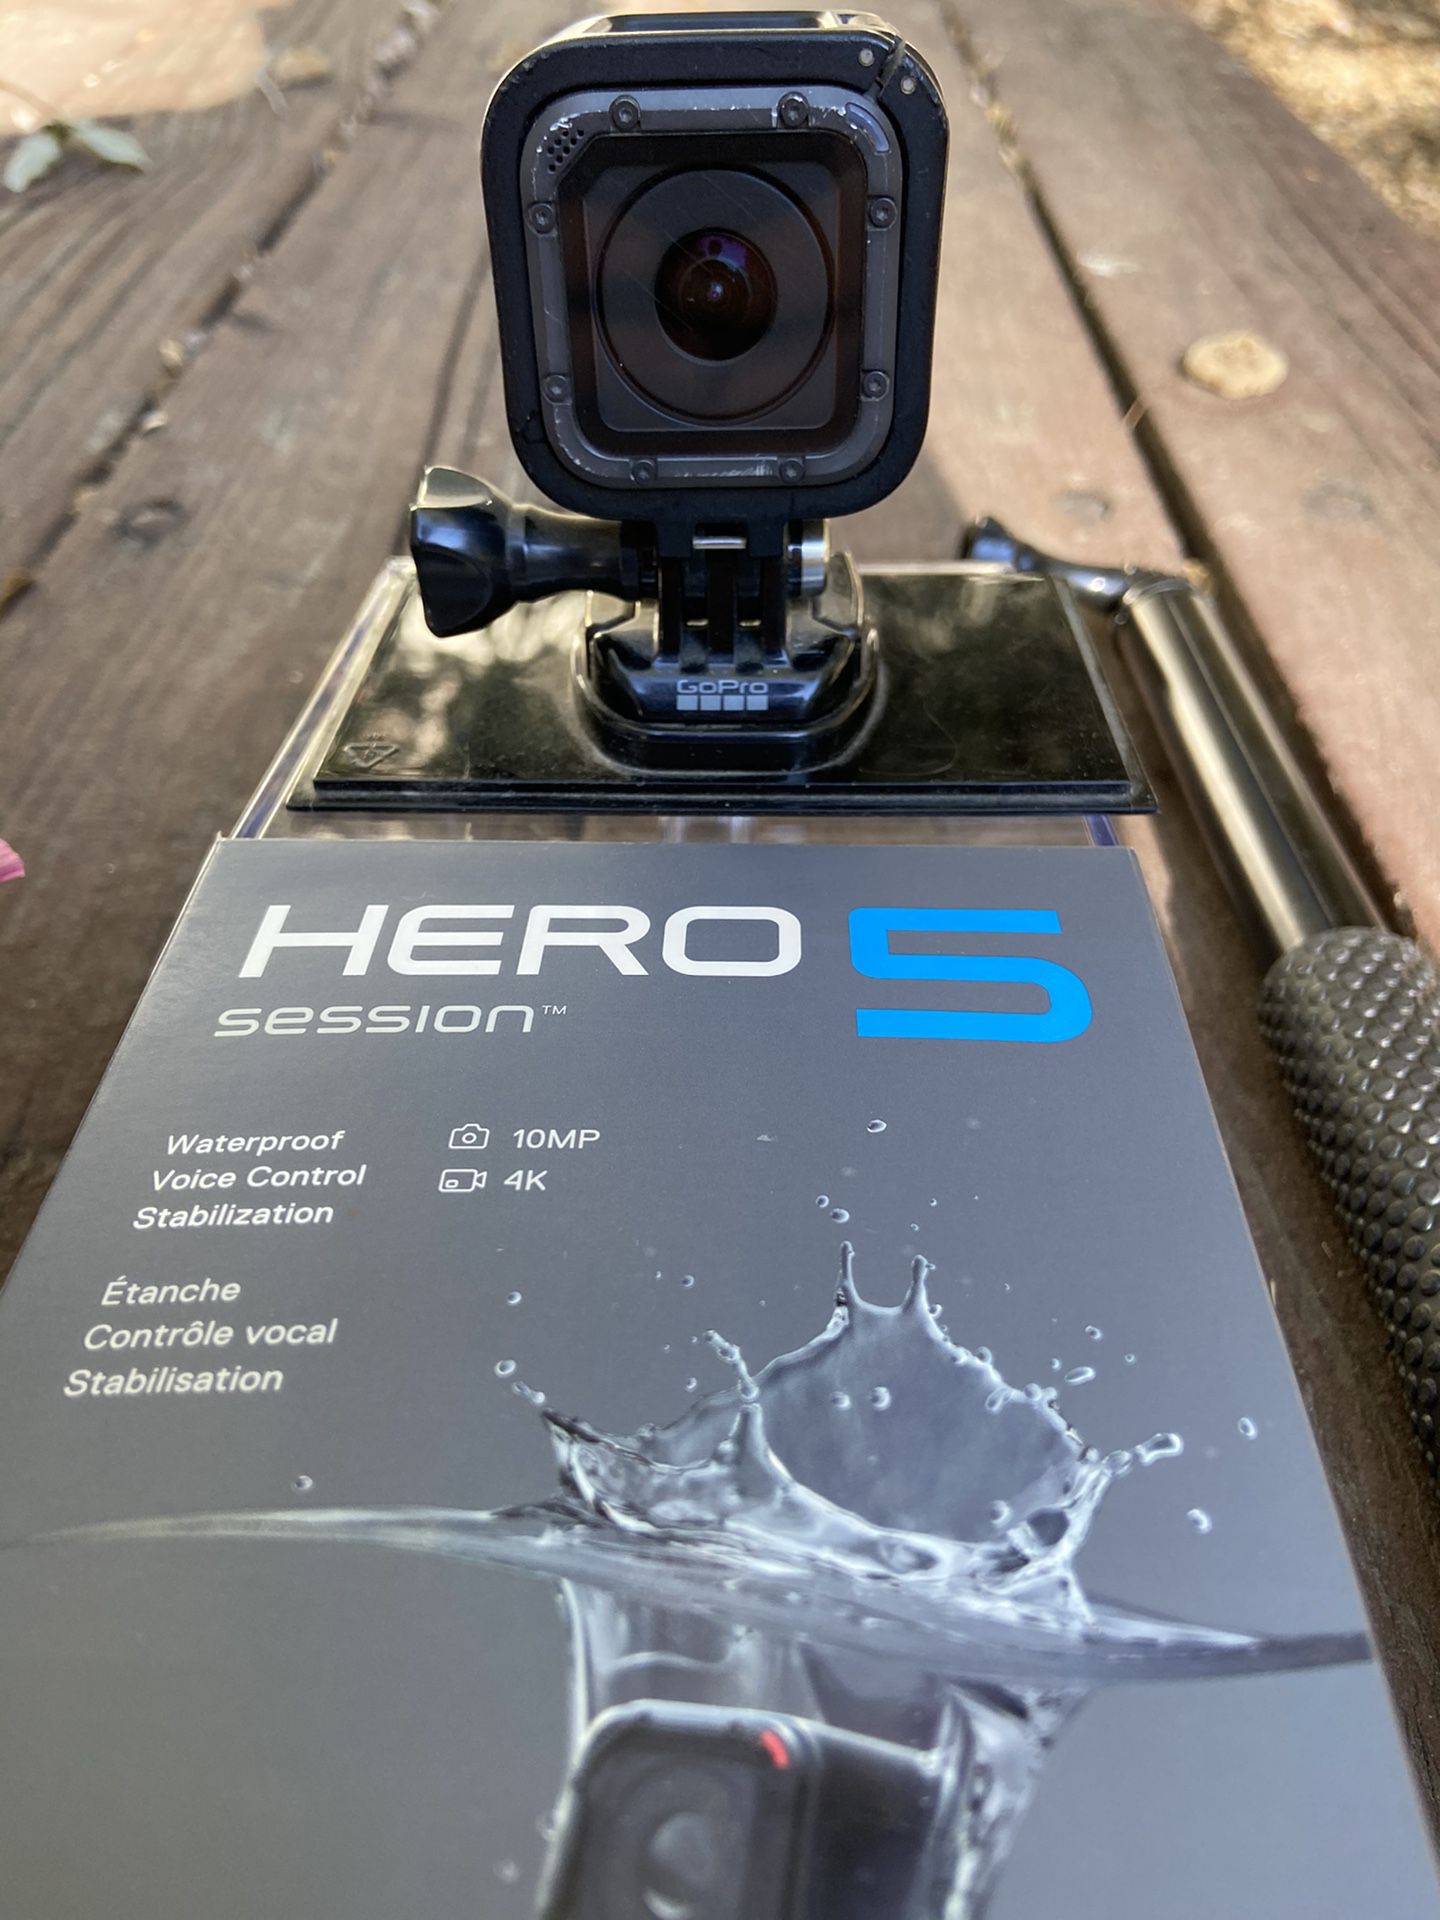 GoPro Hero 5 and accessories